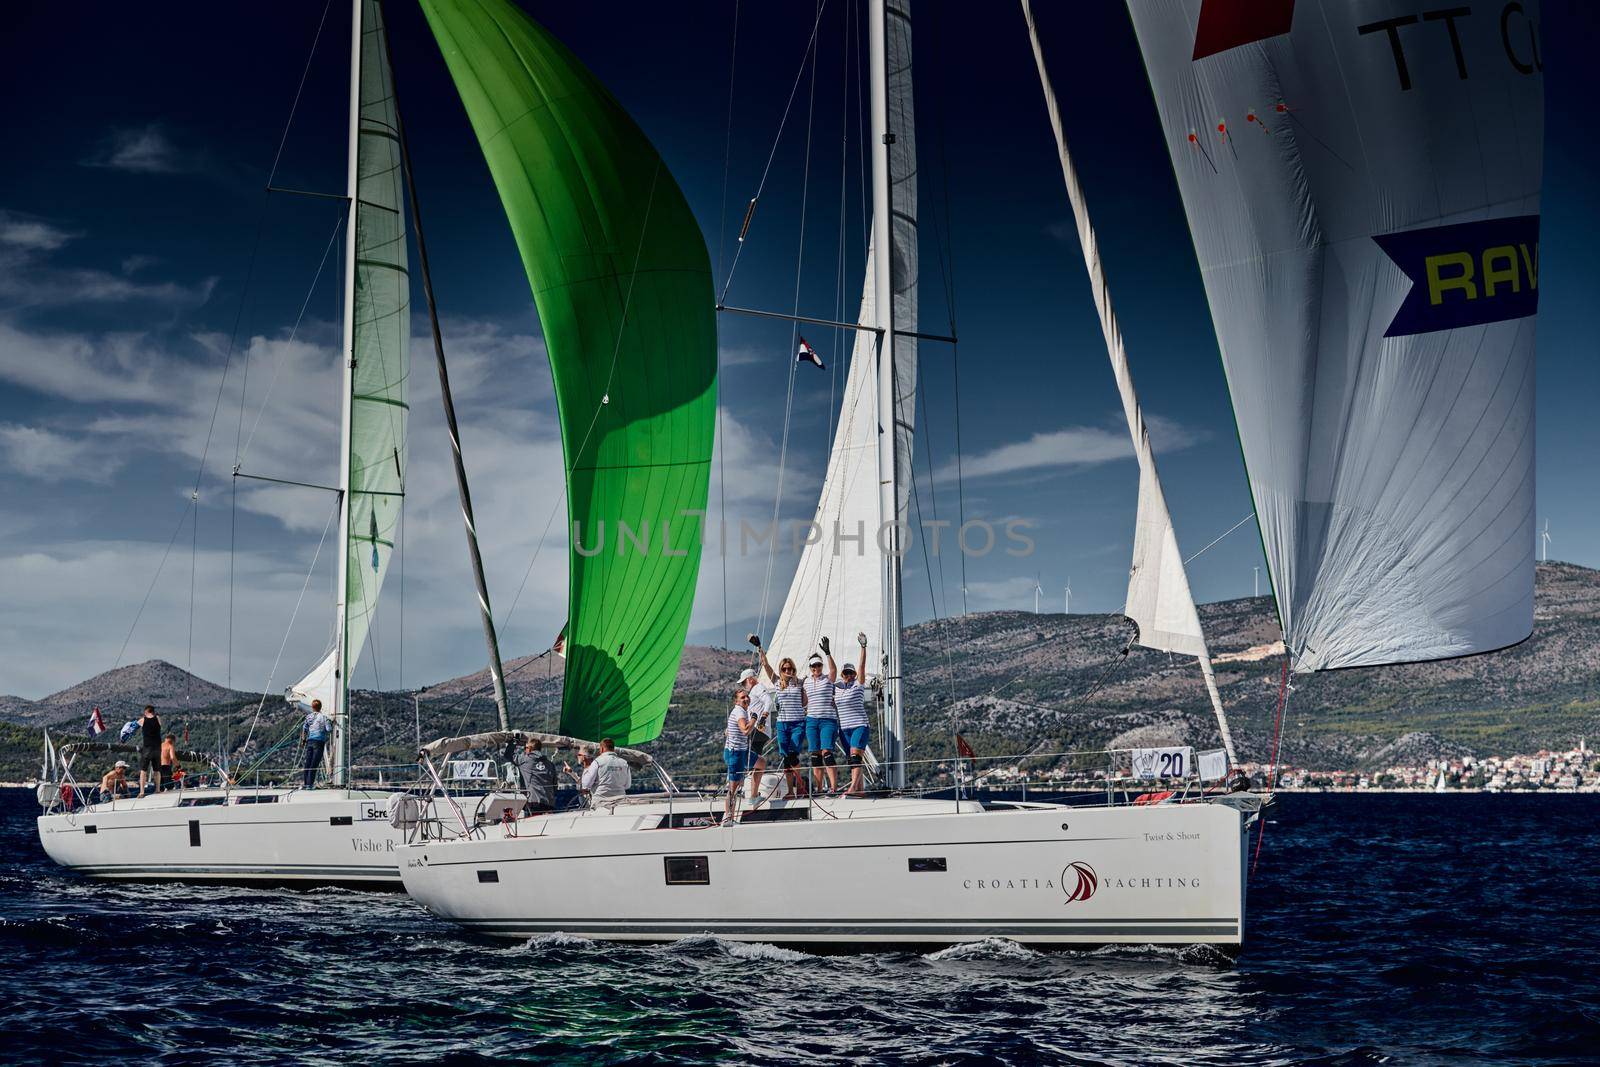 Croatia, Mediterranean Sea, 18 September 2019: The women's team of sailboat celebrates a victory, sailboats compete in a sail regatta, the team works, a steering wheel, multicolored spinnakers by vladimirdrozdin